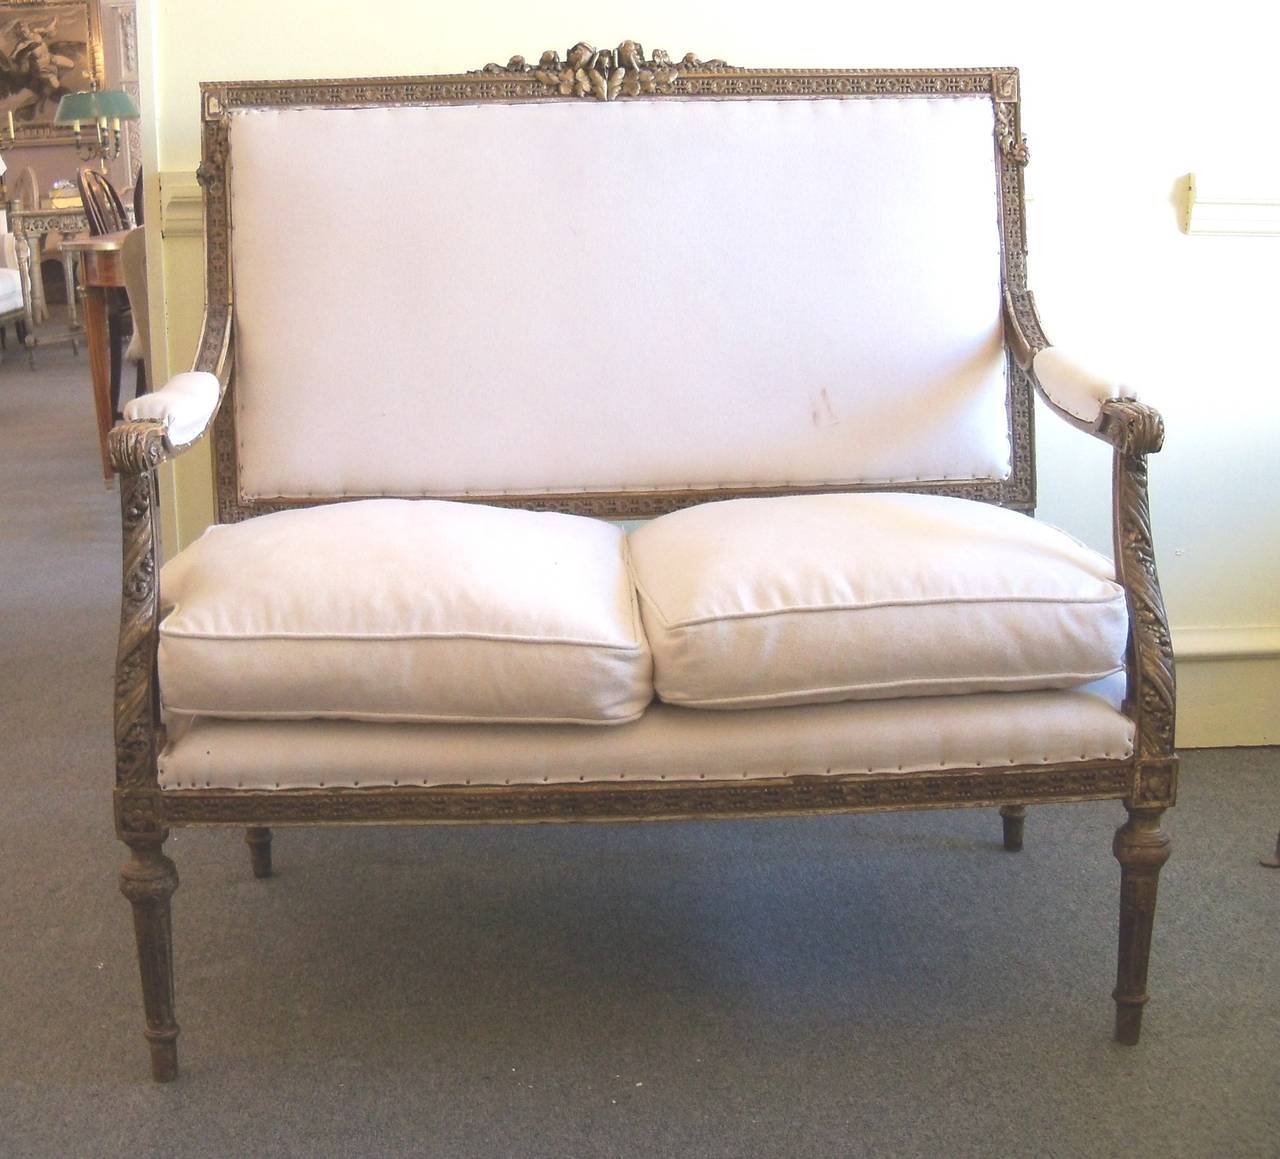 This lovely piece has a carved wood frame decorated with rosettes, garlands, fluting, beading and additional motifs.  The back and seat are relatively newly re-upholstered as are a portion of the arms. The seat also has two seat cushions.